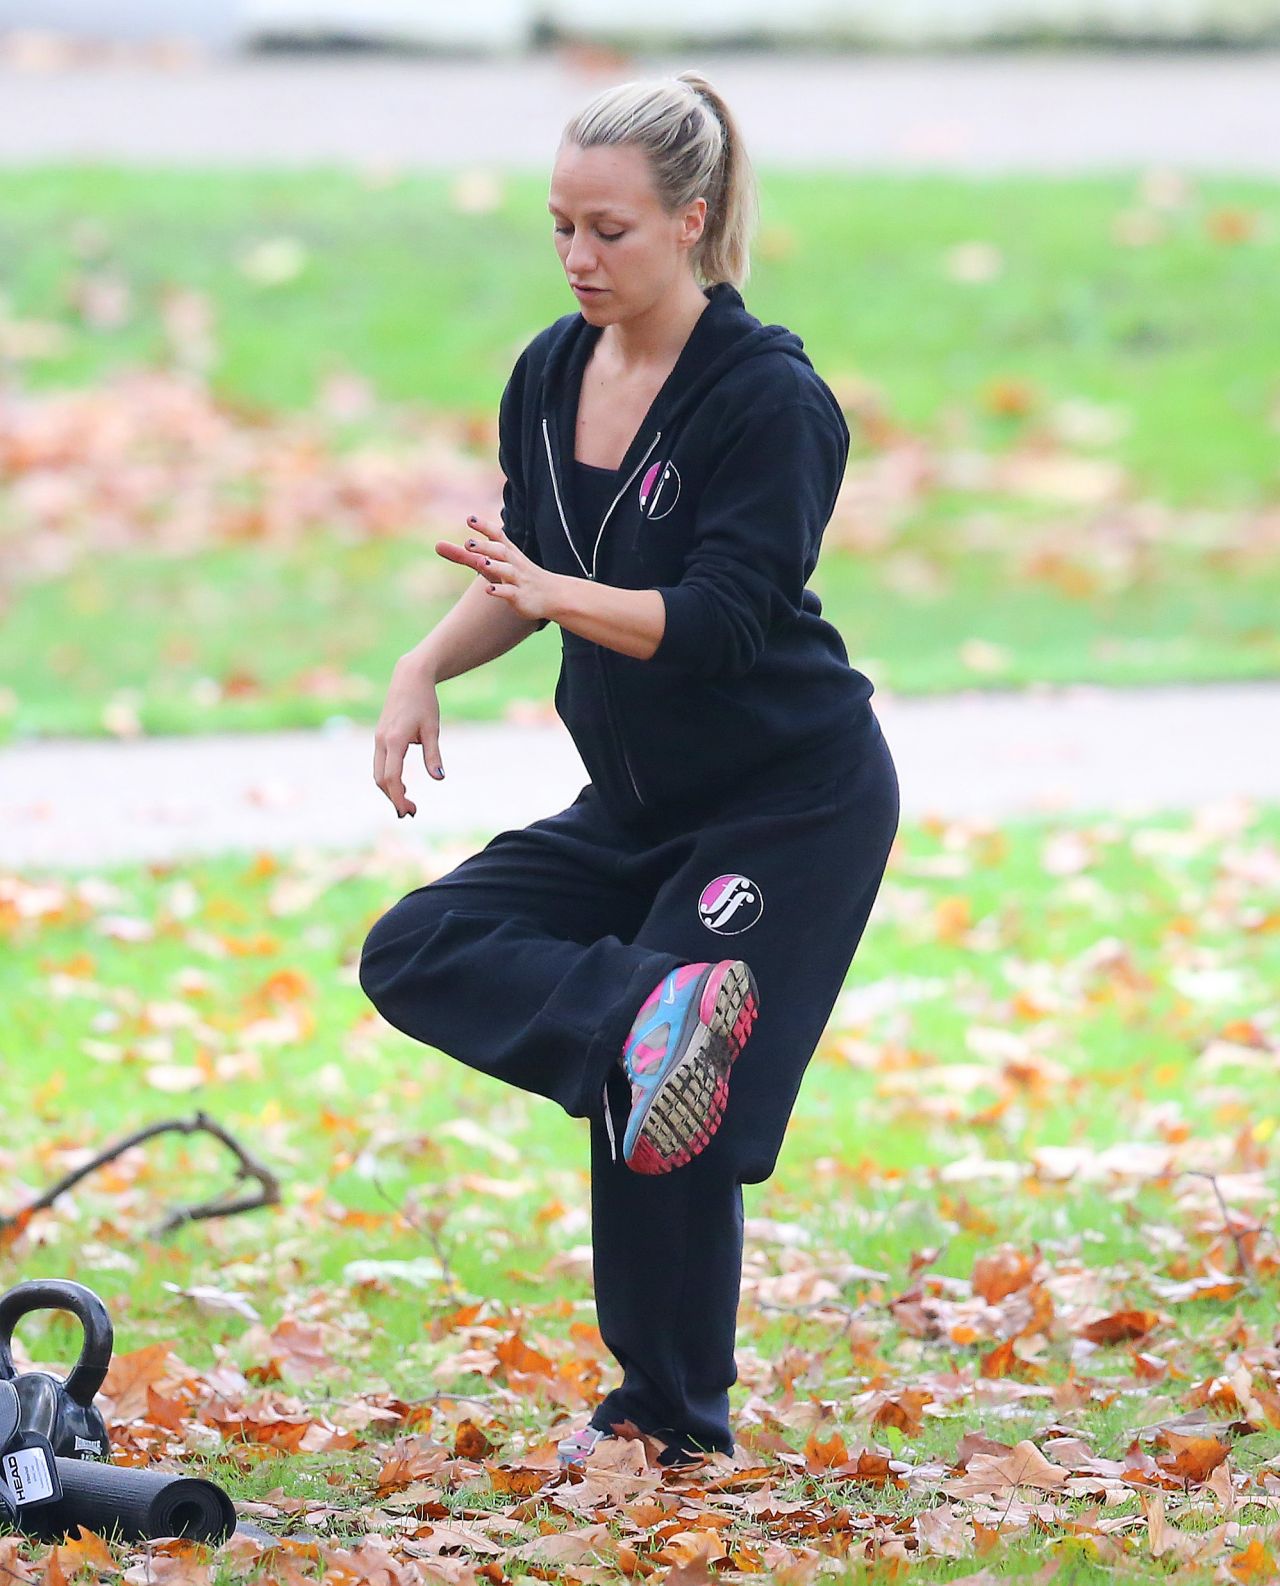 Chloe Madeley - Personal Trainer Workout in a North London Park